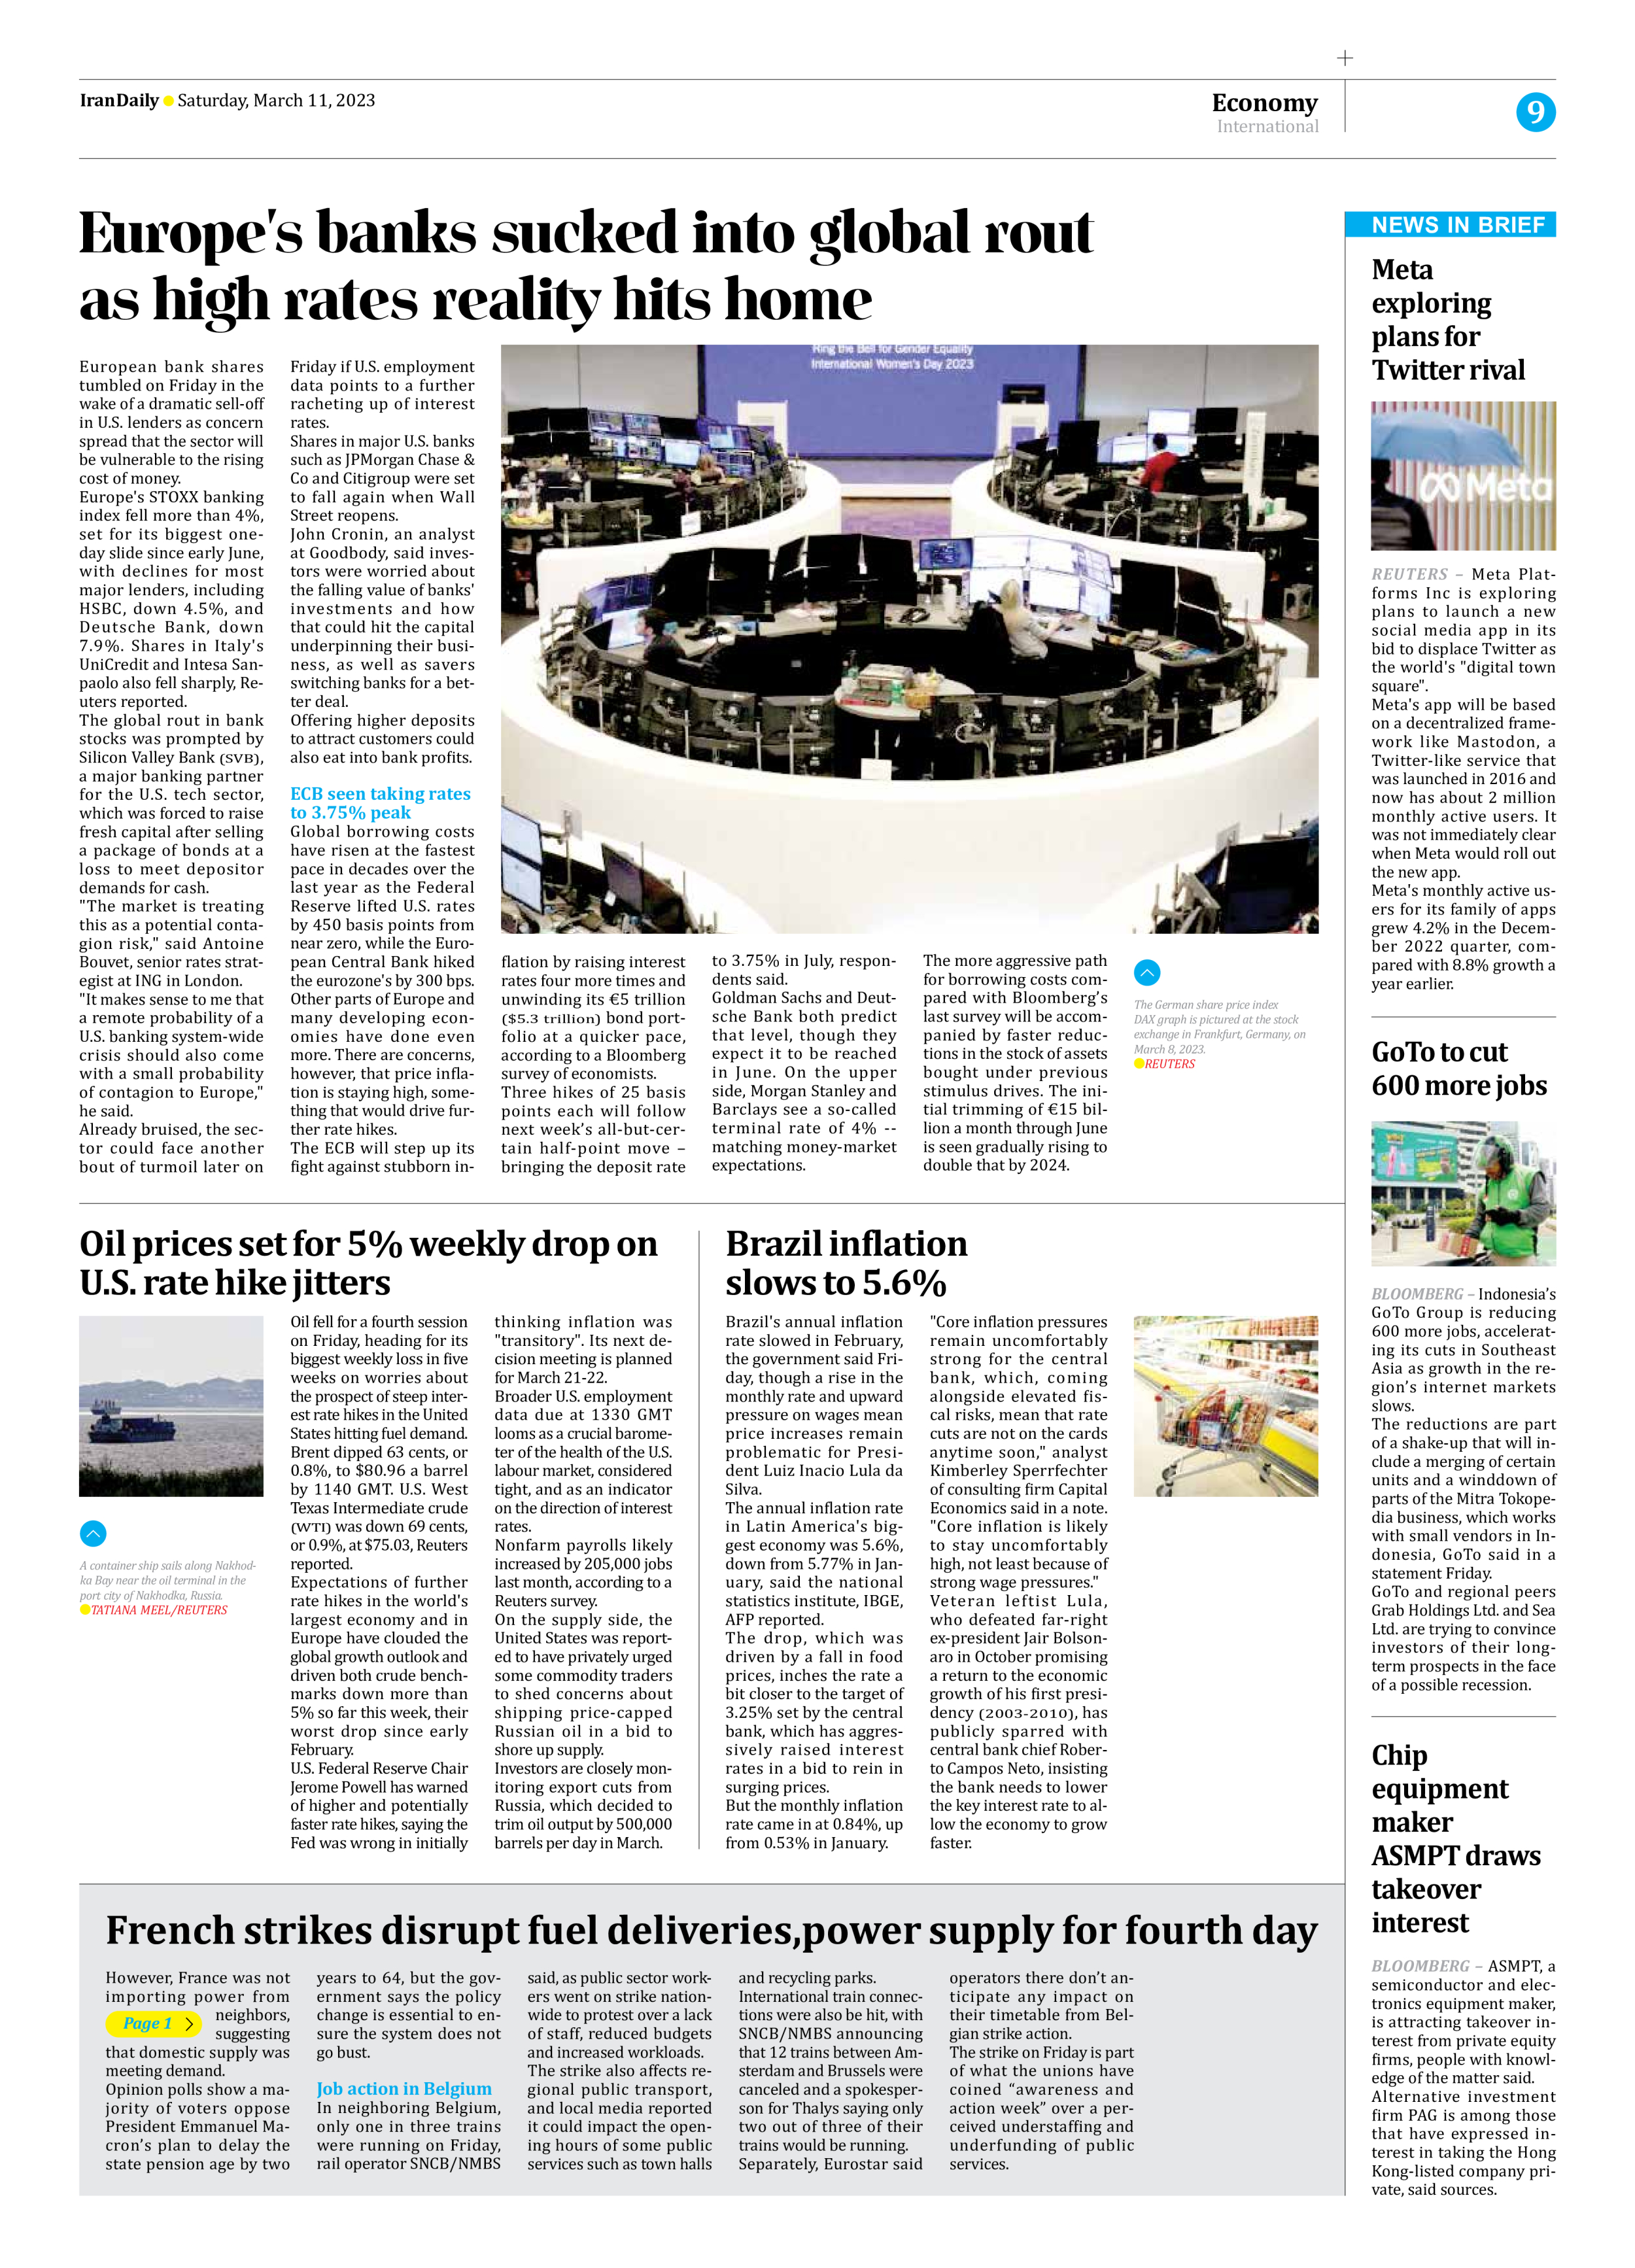 Iran Daily - Number Seven Thousand Two Hundred and Fifty Four - 11 March 2023 - Page 9